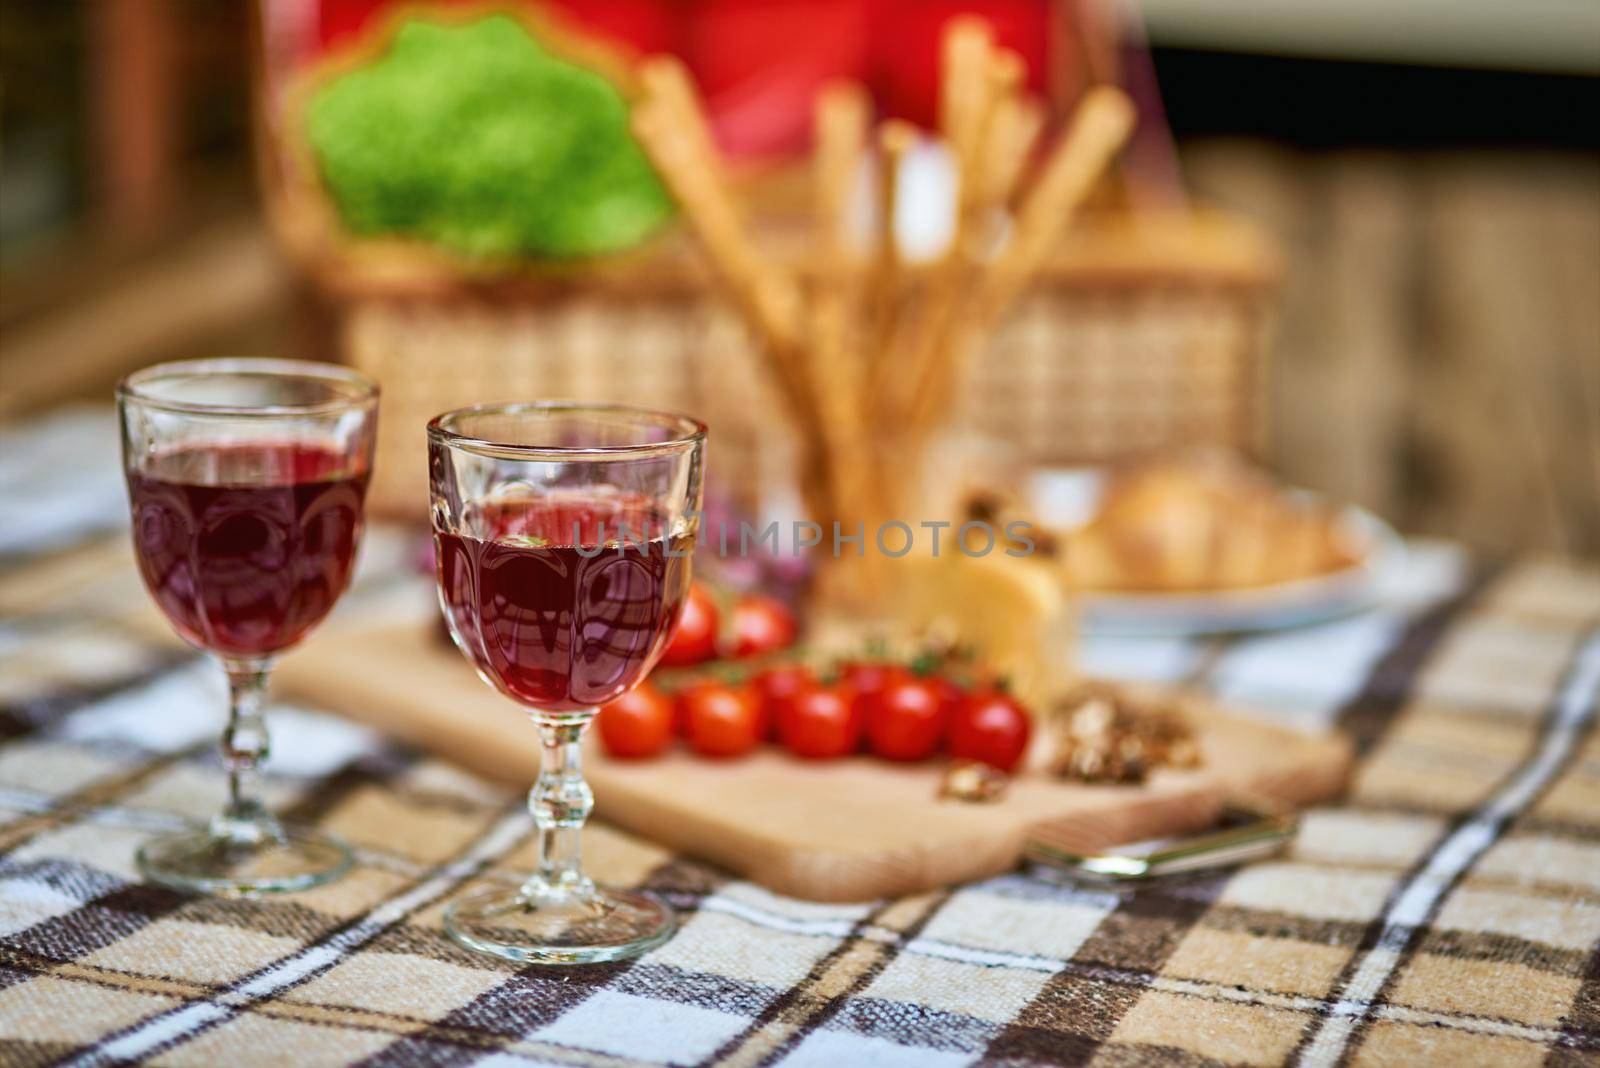 Cozy autumn picnic in the park with wine on warm plaid by friendsstock